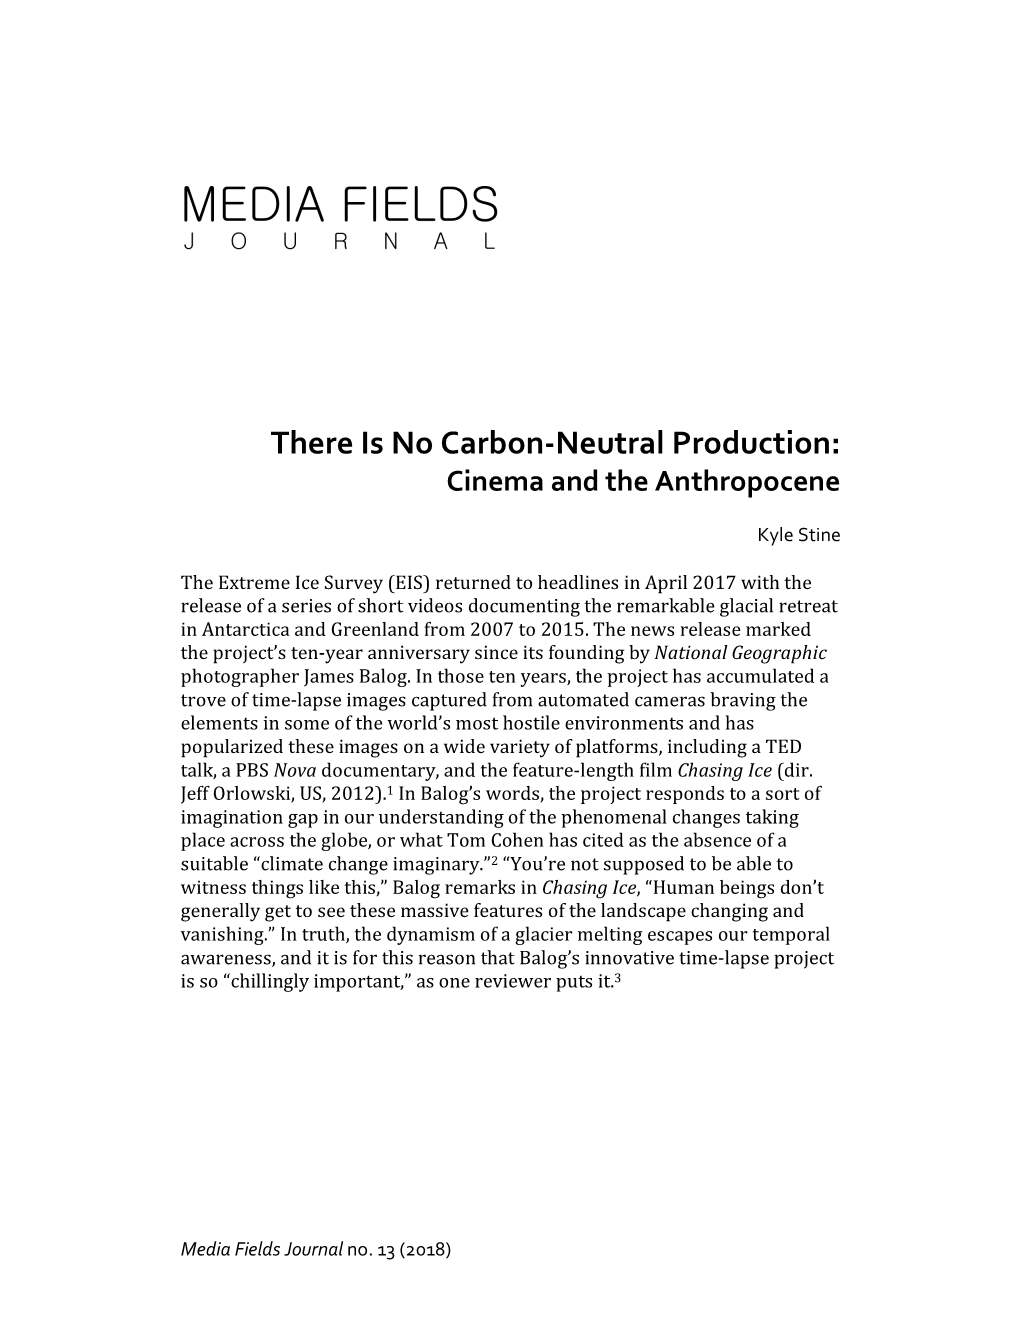 There Is No Carbon-Neutral Production: Cinema and the Anthropocene